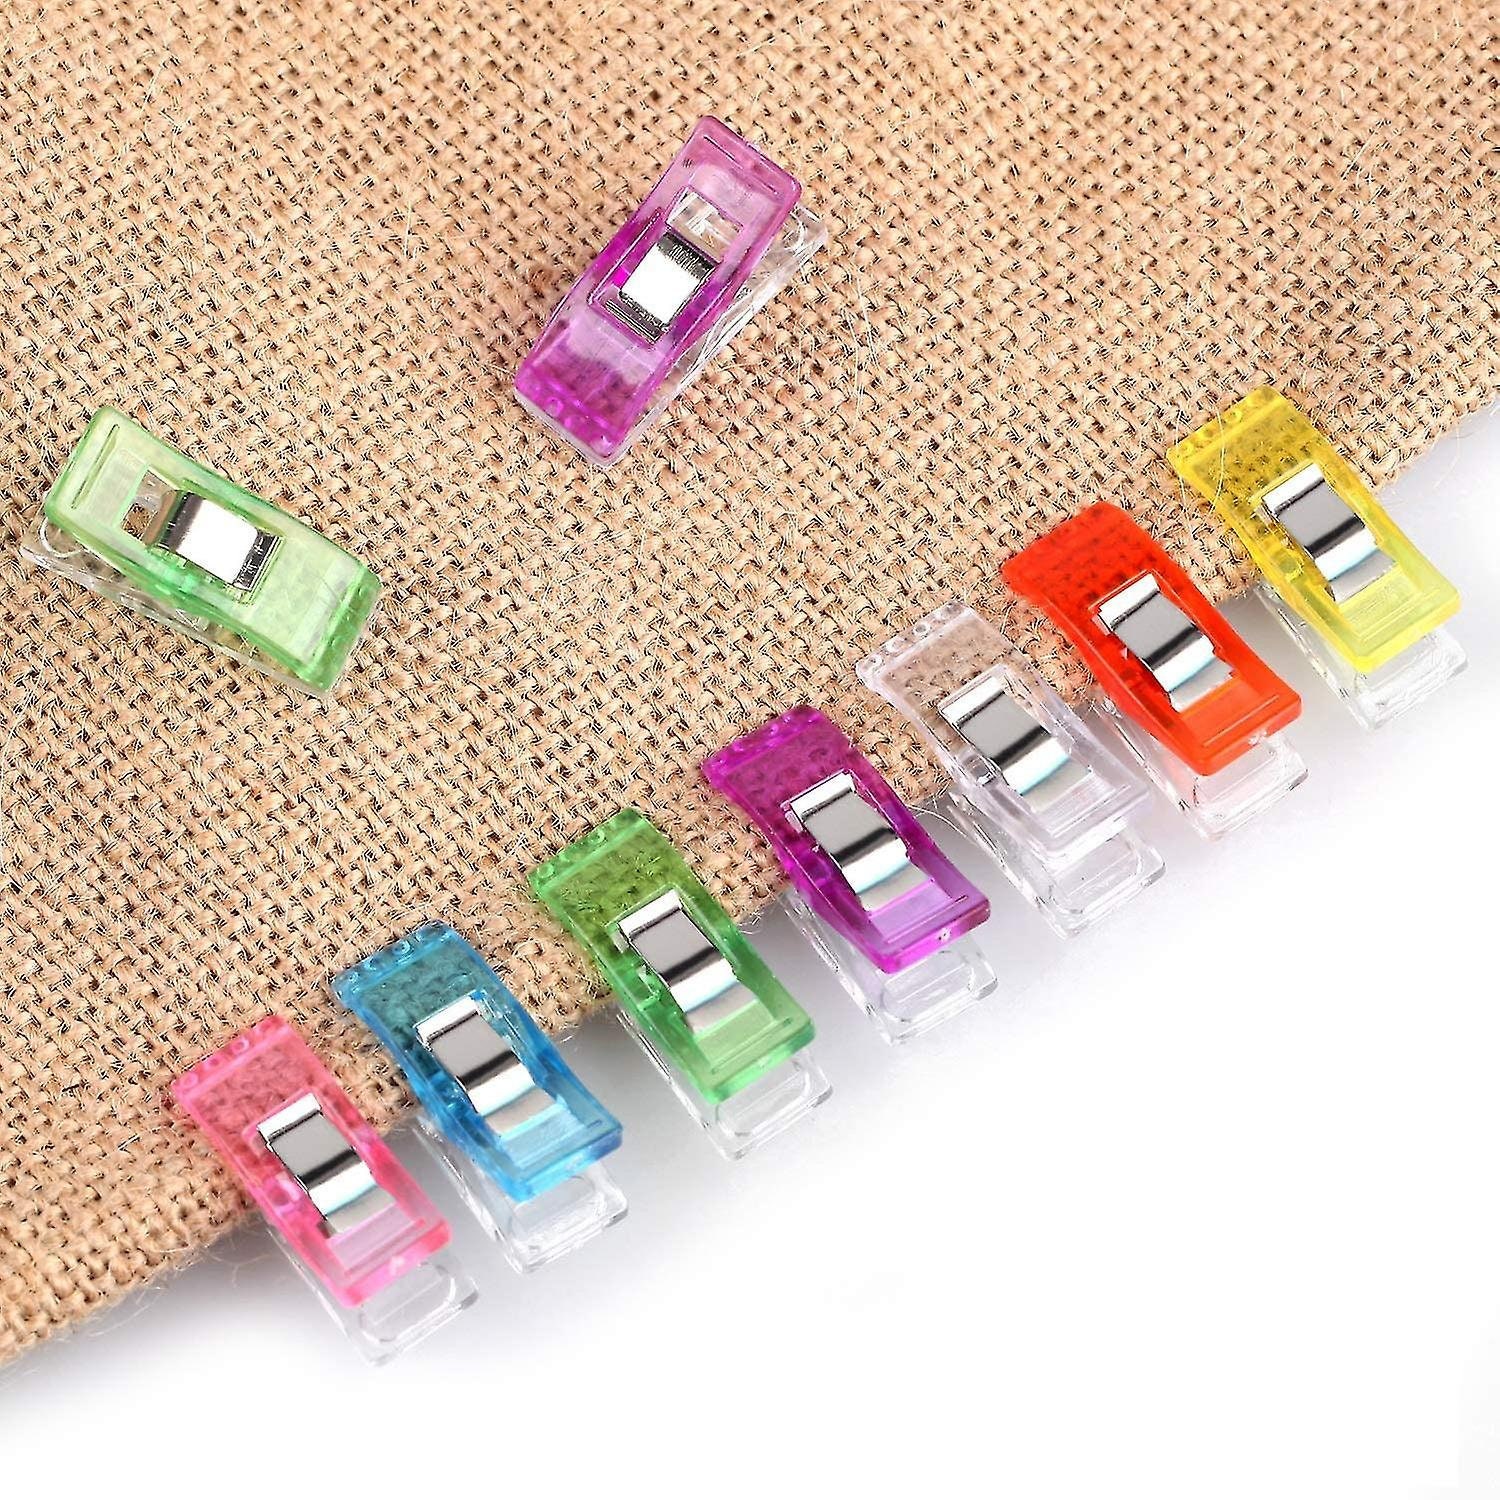 Sewing Clips, Binding Clips, Wonder Clips, Quilt Clips, Plastic Binding  Clips, Craft Clips, Multi Pack 12, 24, 48 Clip Sets, Assorted Colors 